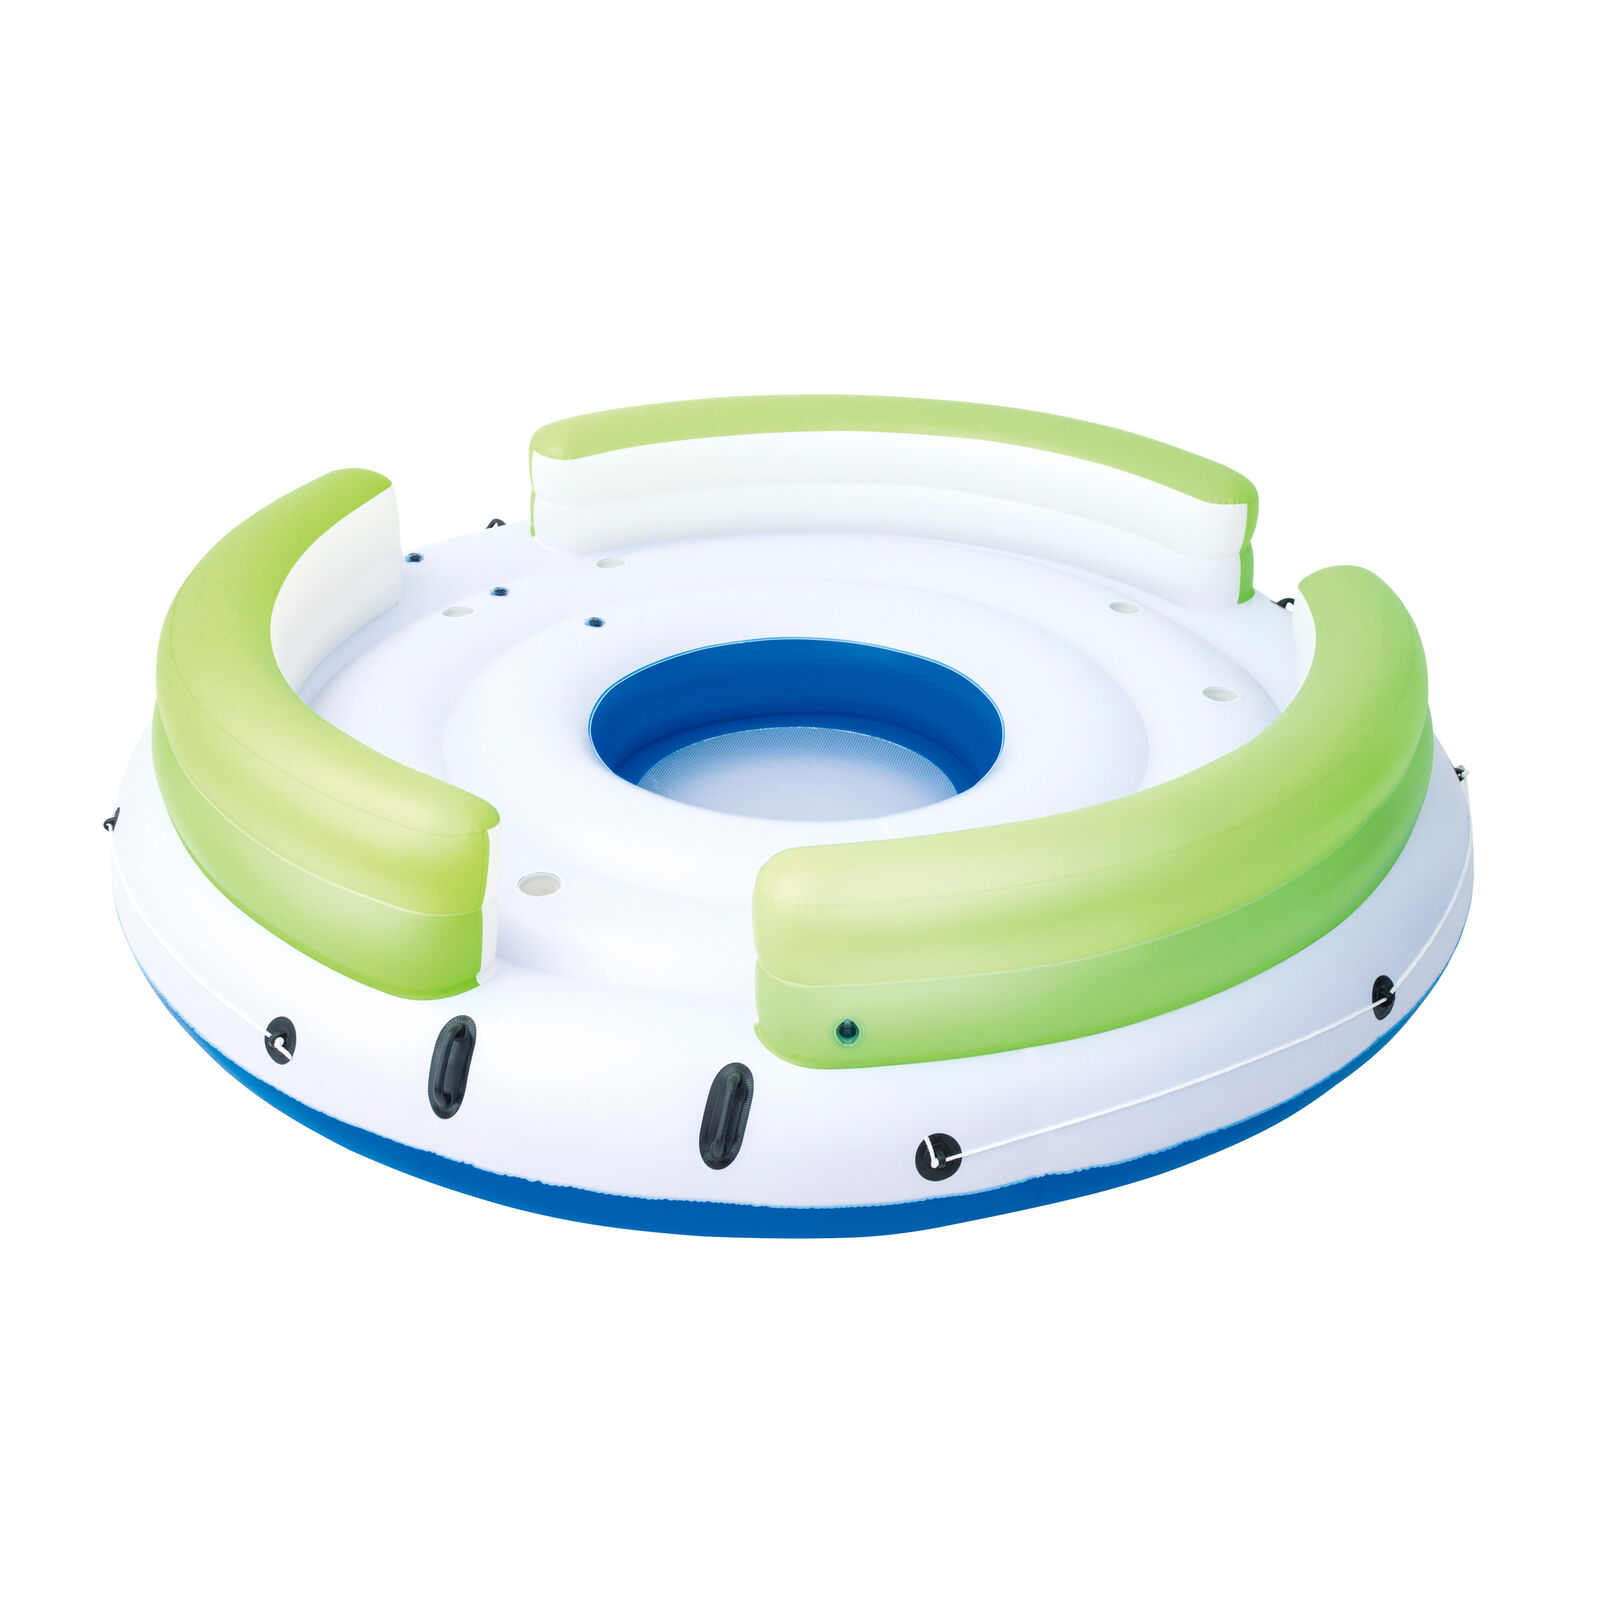 Bestway CoolerZ Lazy Dayz 6-Person Inflatable Floating Island Lounge Raft 43135E